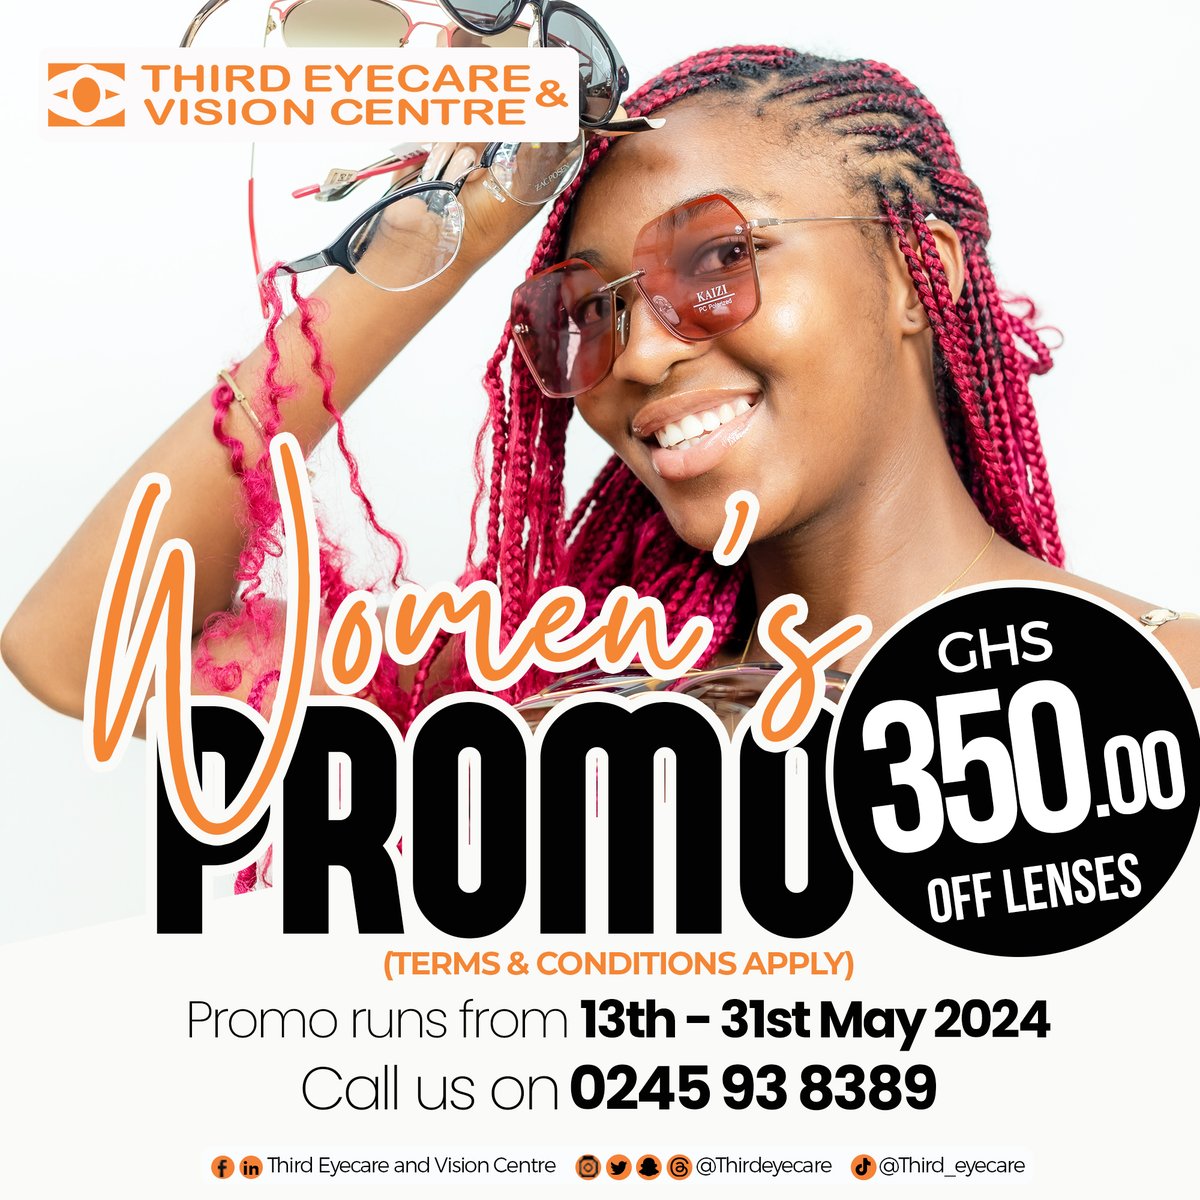 Our special promo for WOMEN is still running!! You can't be left out. Visit any of our Branches and enjoy a 'whooping' discount of 350ghc Off ALL LENSES. Promo lasts till 31st May, 2024.😎👓😉 #thirdeyecare #besteyeclinicinghana #ghana #MothersDay #ForallWomen #CelebrateMothers